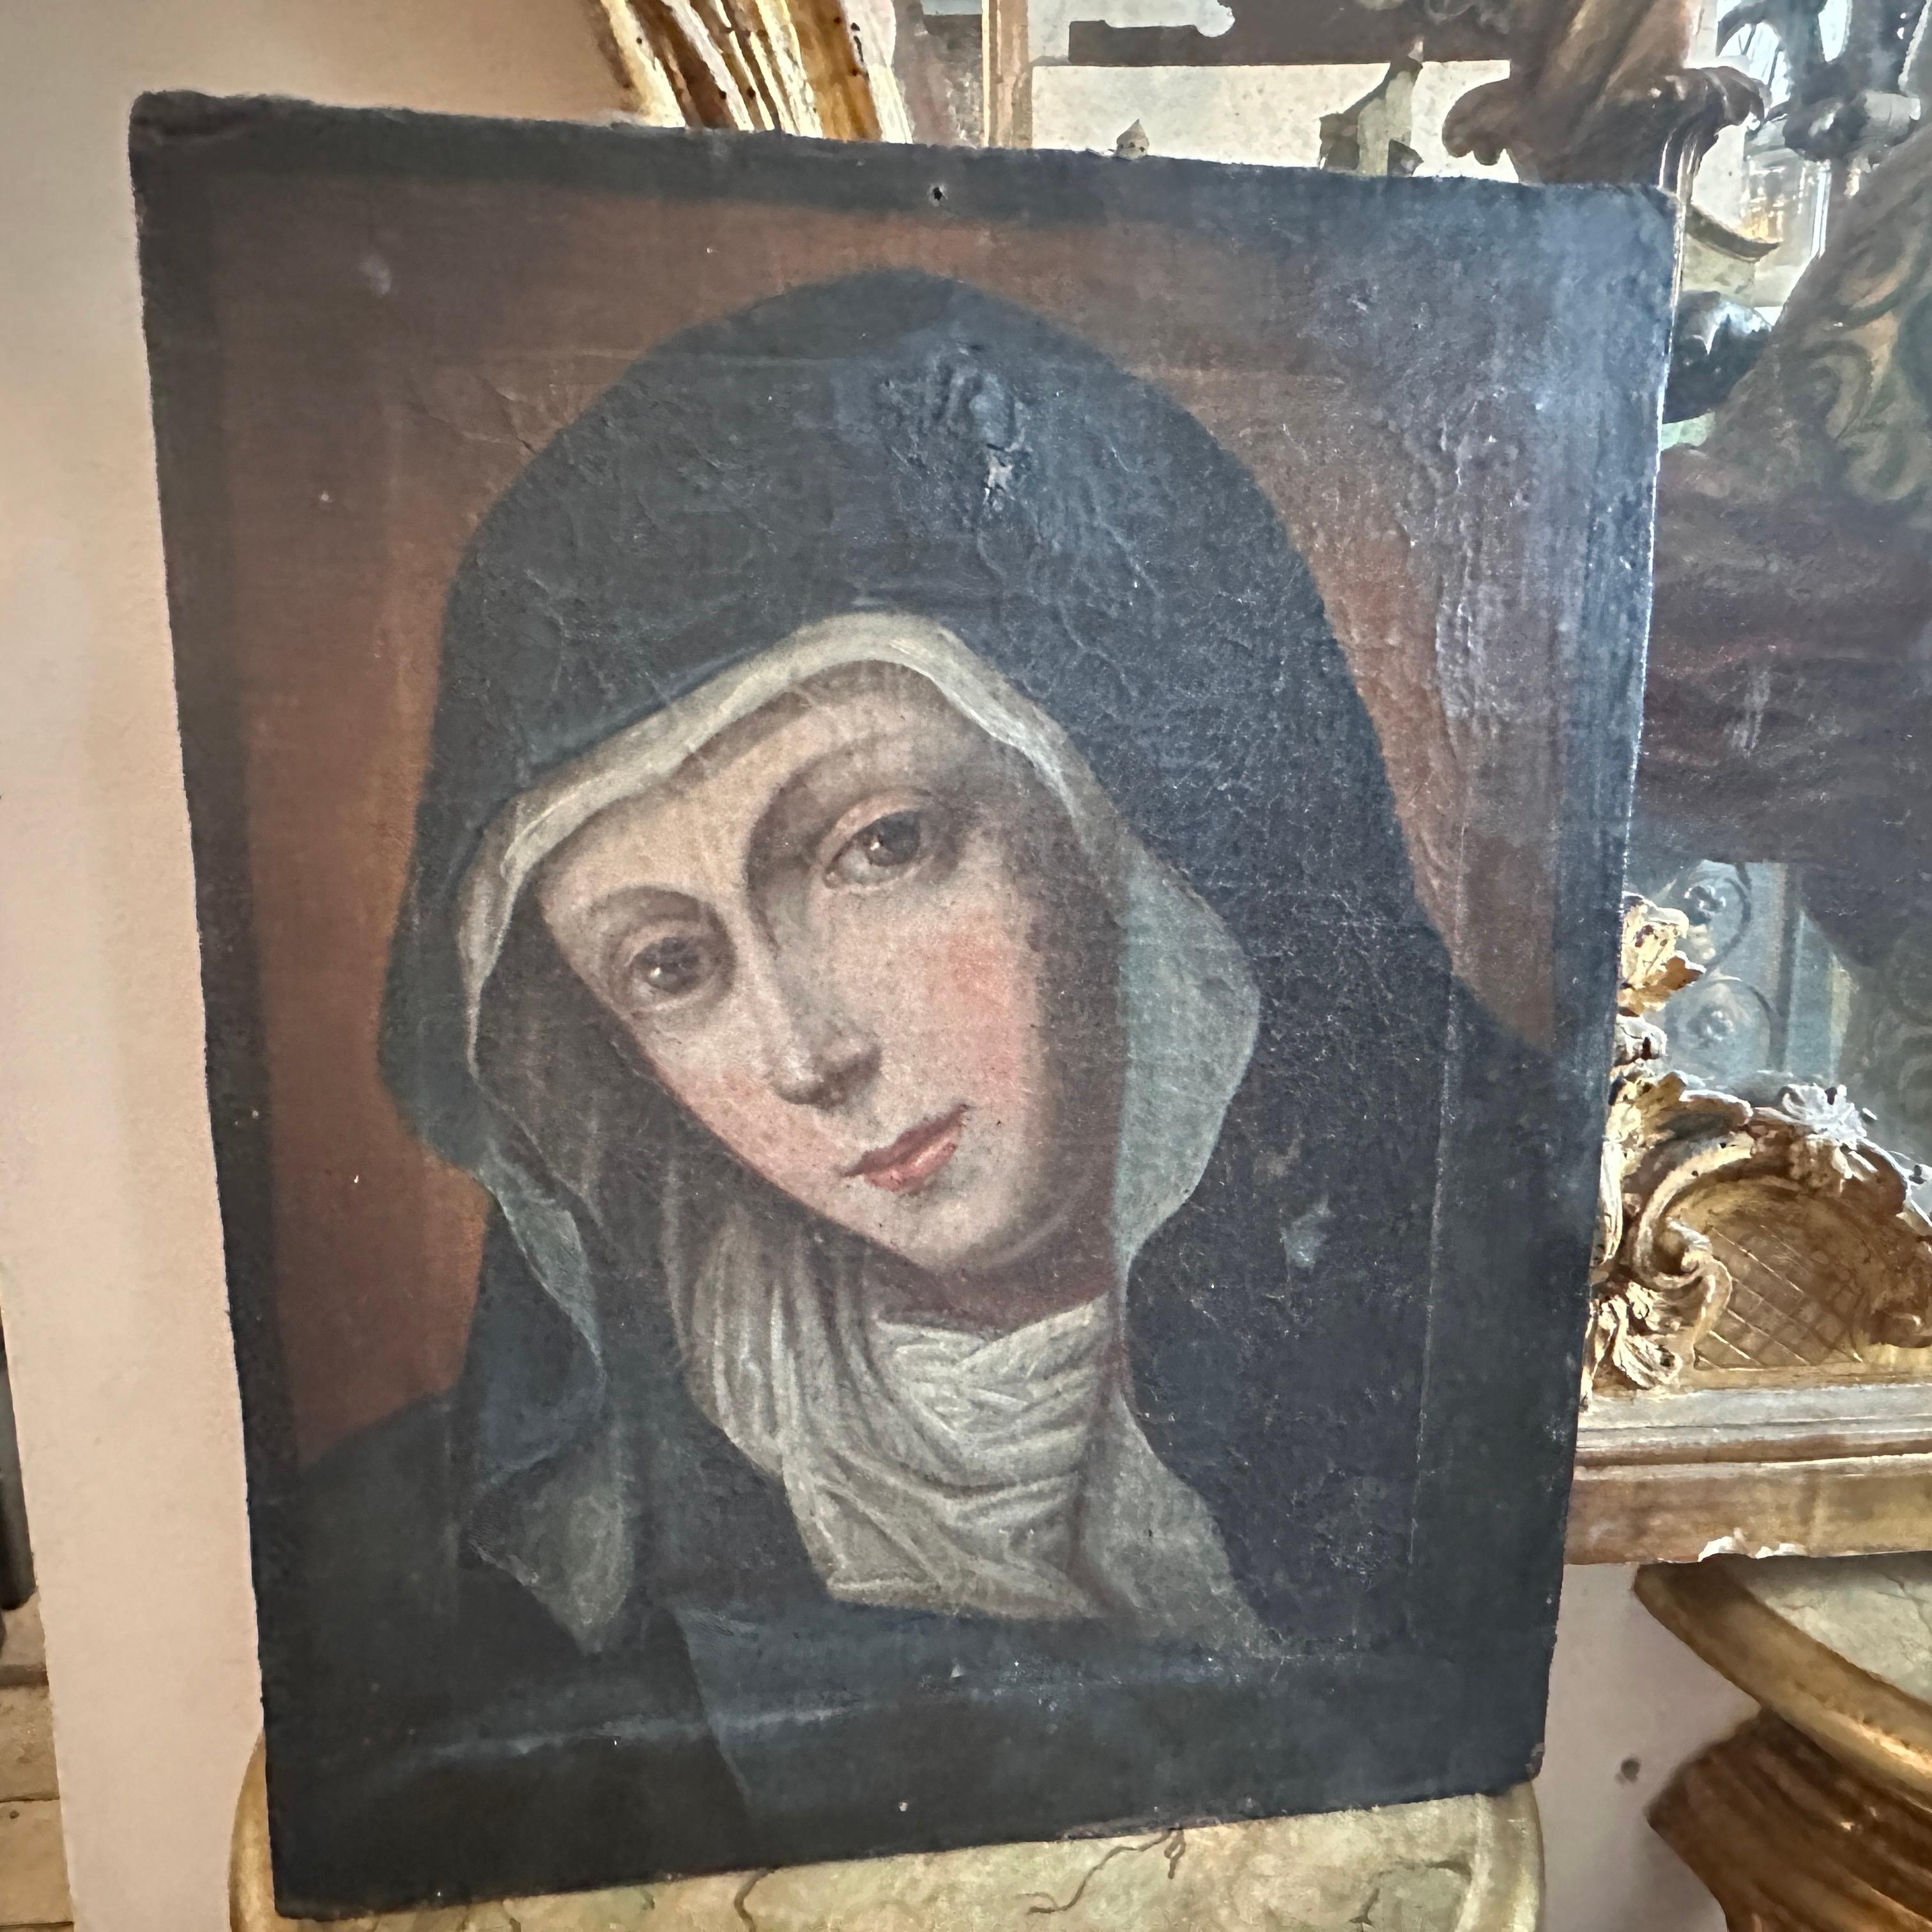 An italian painting of a Madonna addolorata in original conditions, not framed. Unknown artist.
This painting of Madonna Addolorata (Our Lady of Sorrows) it's a beautifully crafted work of religious art, reflecting the artistic and cultural trends